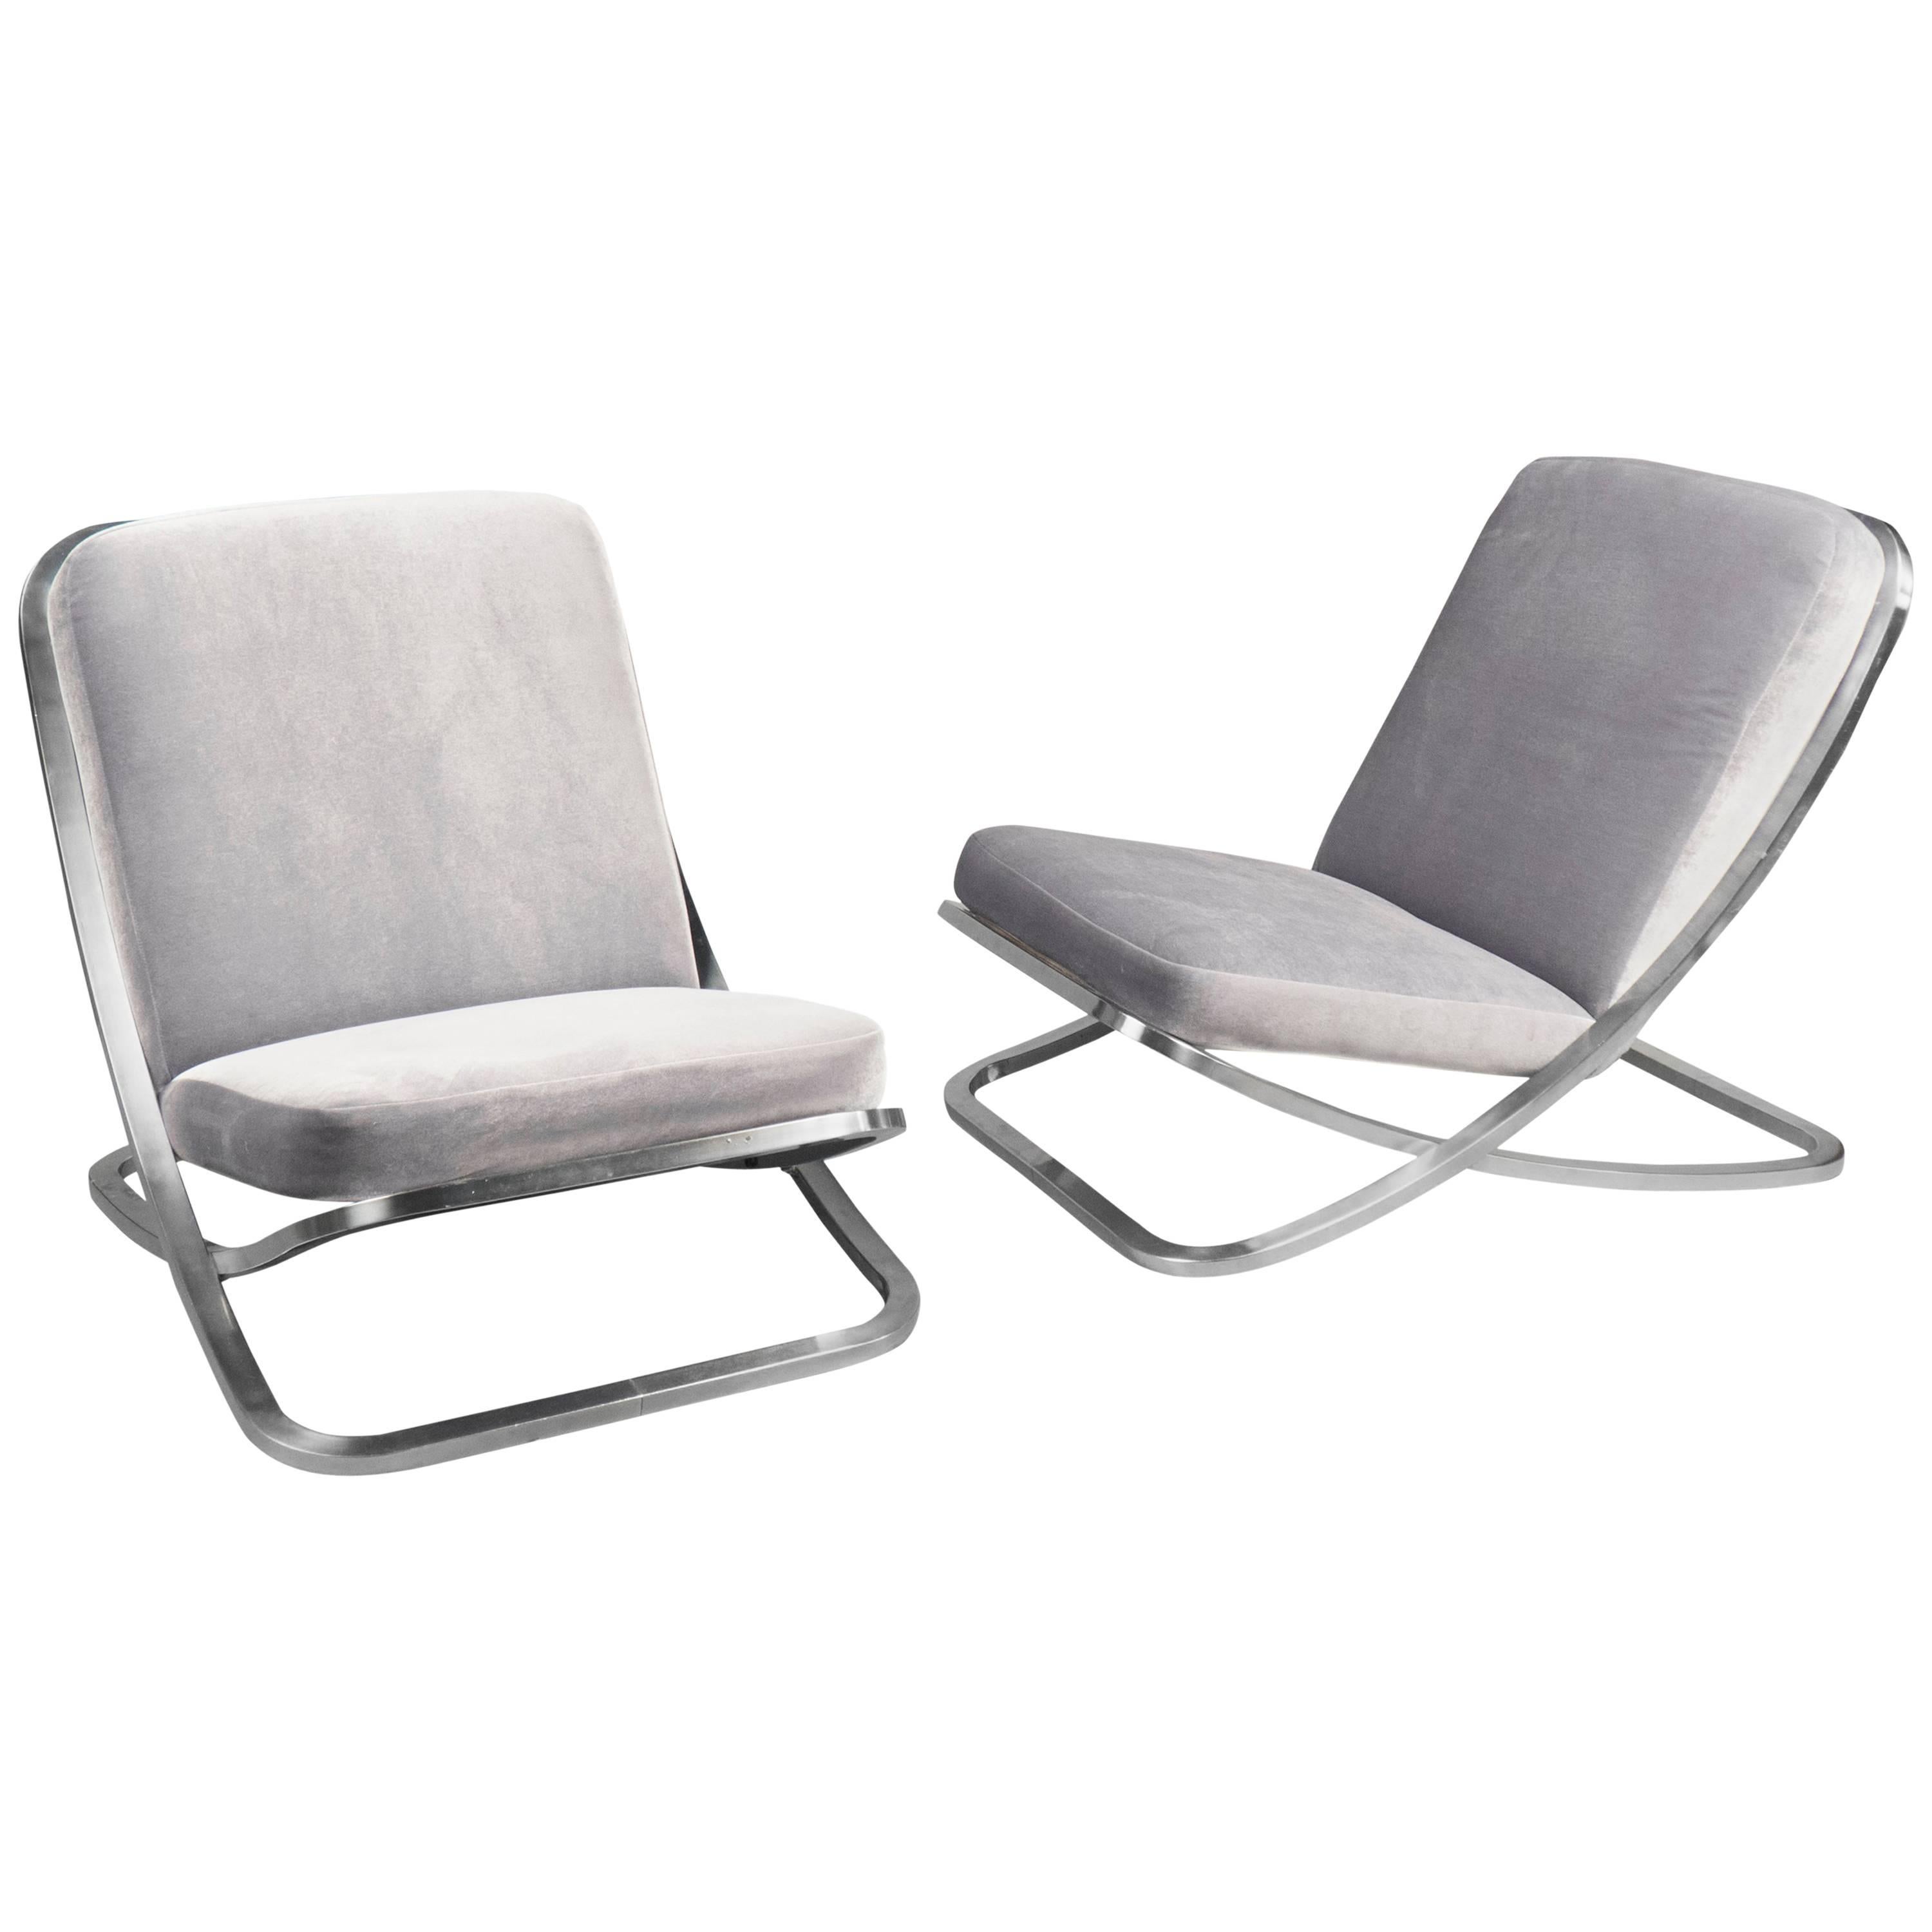 Pair of Low Nickel Slipper Chairs, France, 1970s For Sale